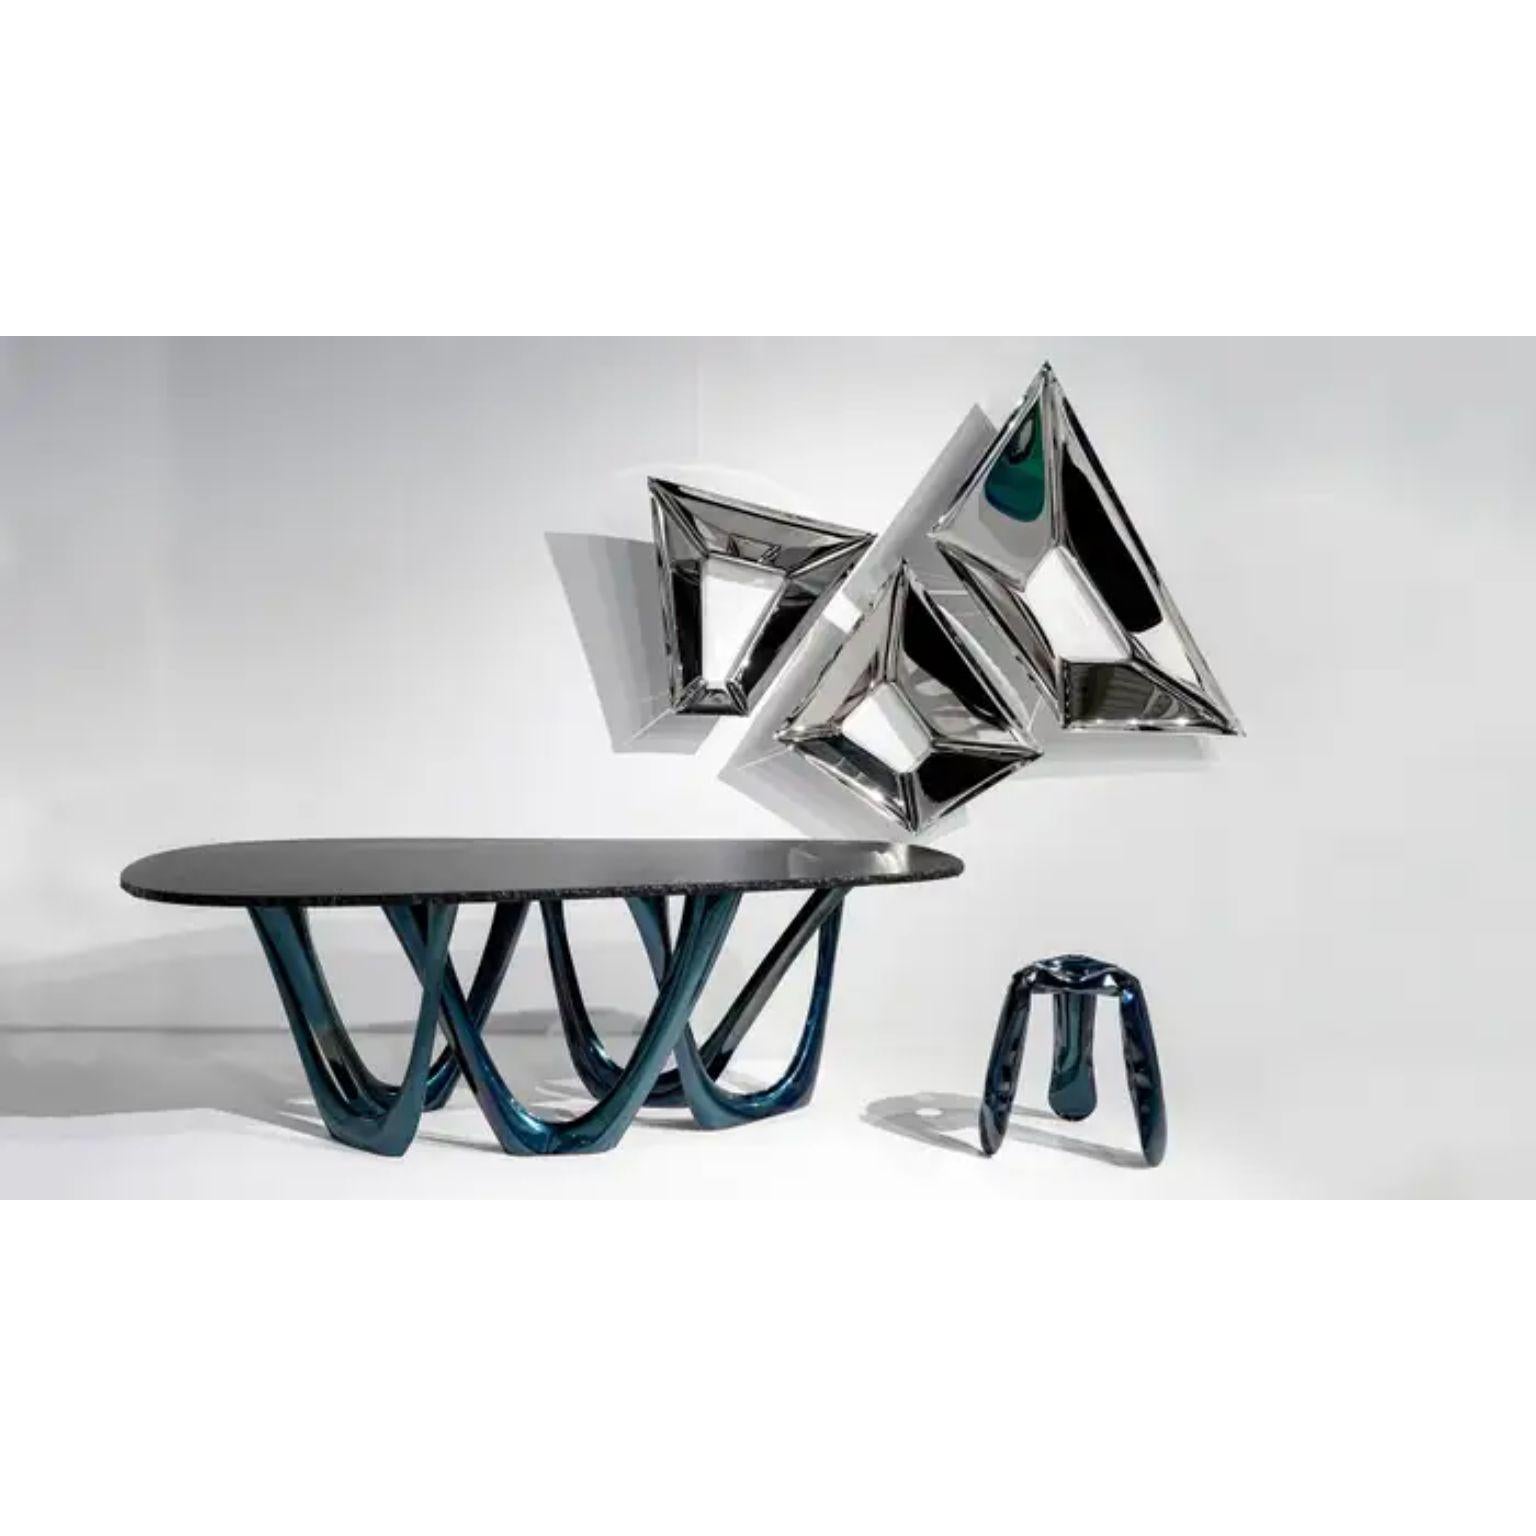 Cosmic Blue Cosmos Granite Sculptural G-Table by Zieta
Dimensions: D 120 x W 230 x H 75 cm. 
Materials: Stainless steel and granite. 
Finish: Cosmic blue.

Available in colors: Beige, Black/Brown, Black glossy, Blue-grey, Concrete grey, Graphite,